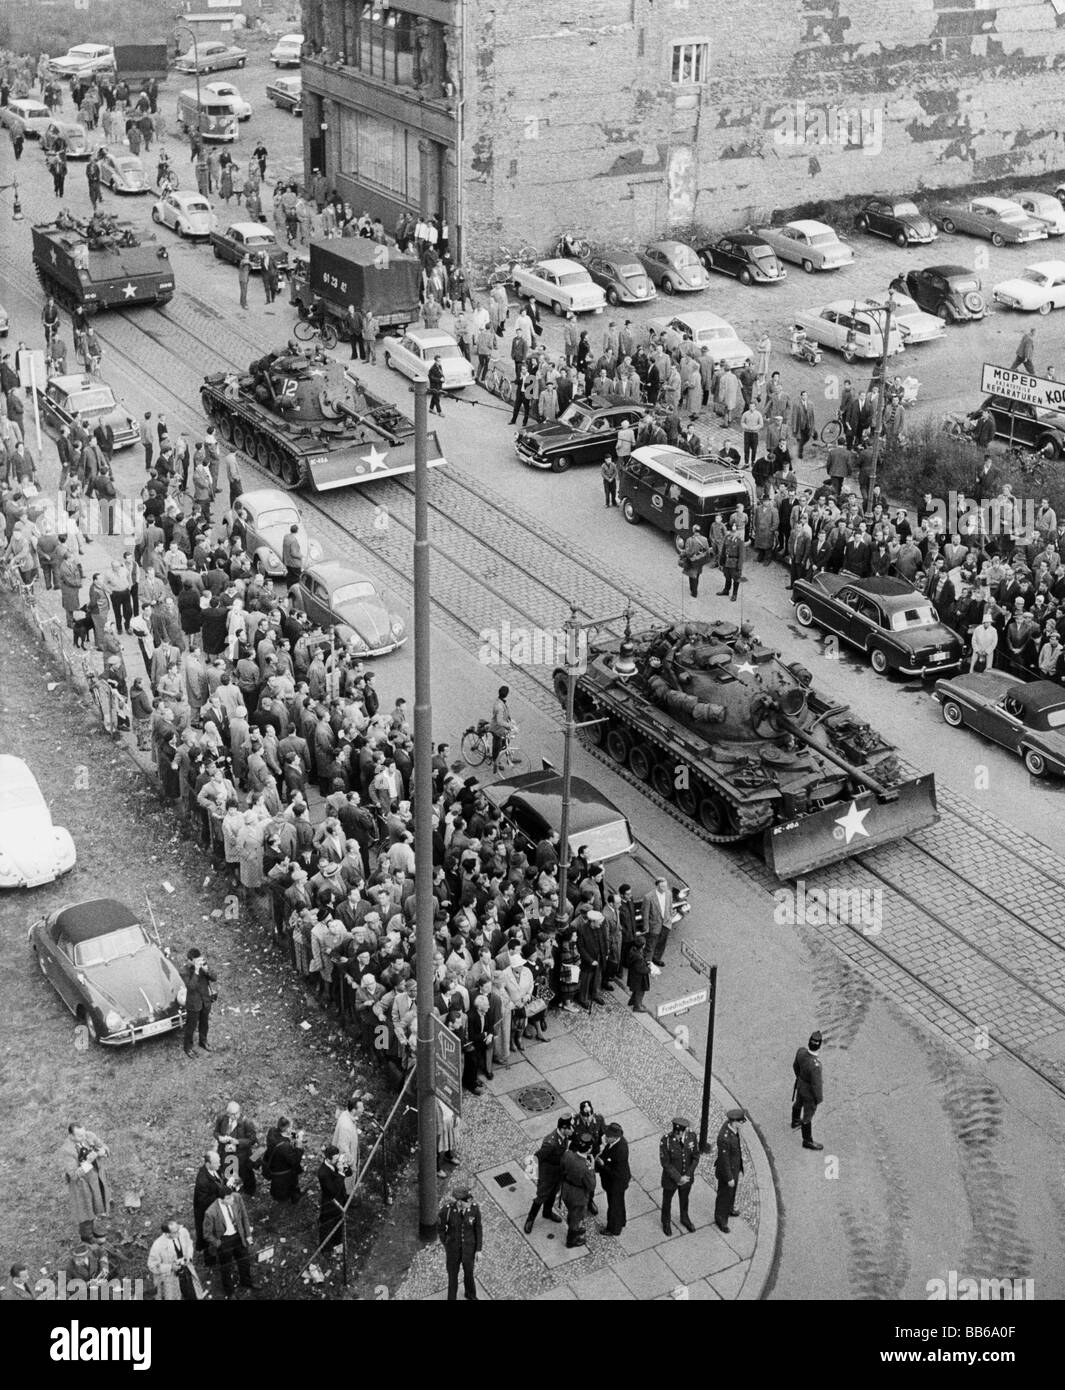 geography / travel, Germany, Berlin, politics, American tanks at Friedrichstrasse, 27.10.1961, Checkpoint Charlie, wall, crisis, tank, M48, M-48, M 48, military, USA, crowd, people, West Berlin, sectoral border, cold war, 20th century, historic, historical, 1960s, Stock Photo